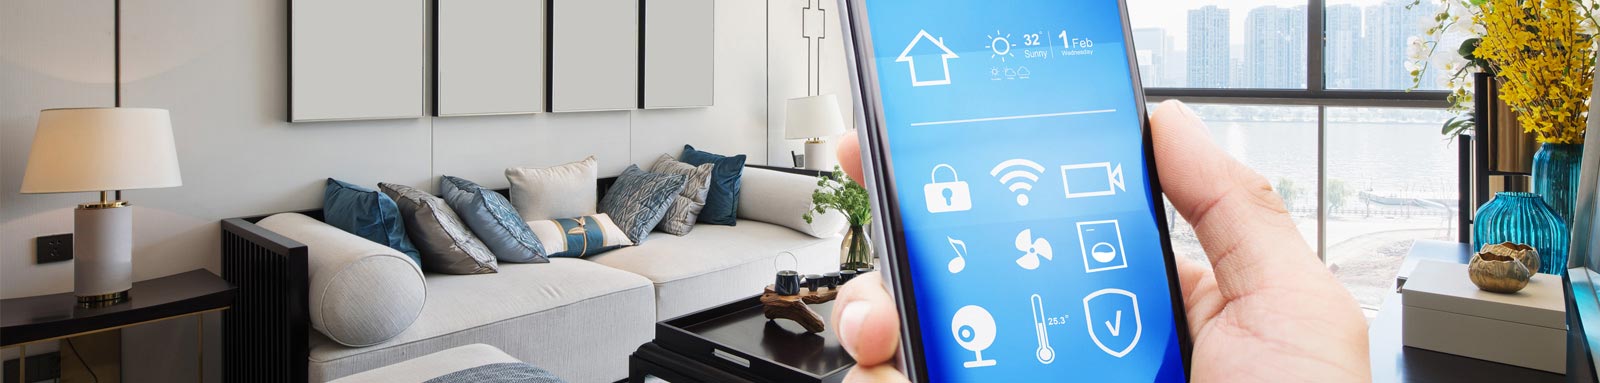 Man holding smartphone in living room